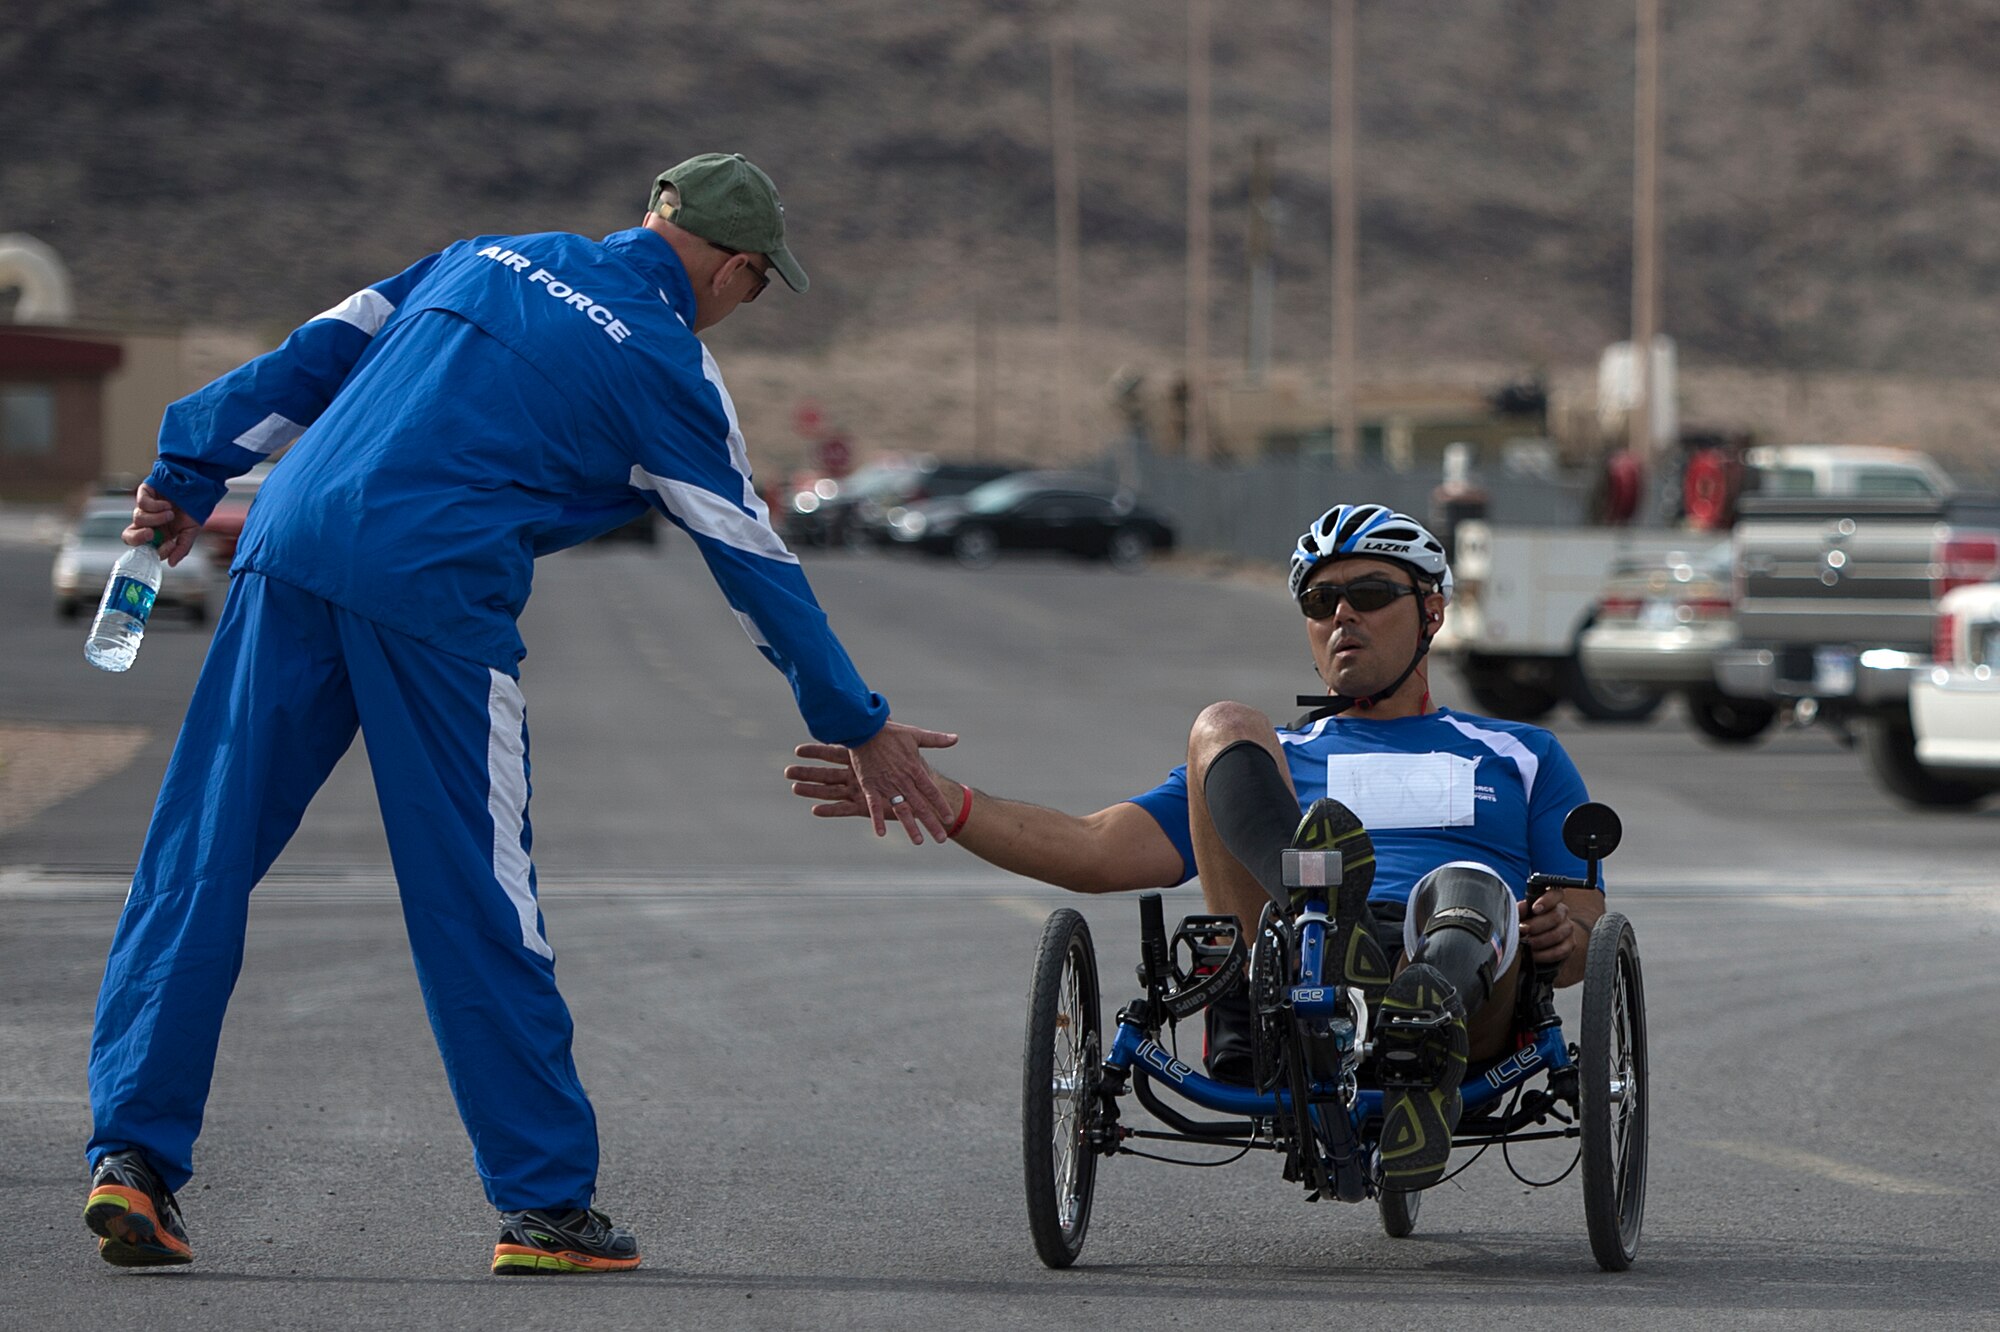 Christopher Aguilera cycles by Mike Sanders to receive a high-five after he finished the race April 9, 2014, during the Air Force Trials at Nellis Air Force Base, Nev. Aguilera, and Air Force wounded warrior, placed first in his category during the cycling completion. (U.S. Air Force photo/Senior Airman Jette Carr)